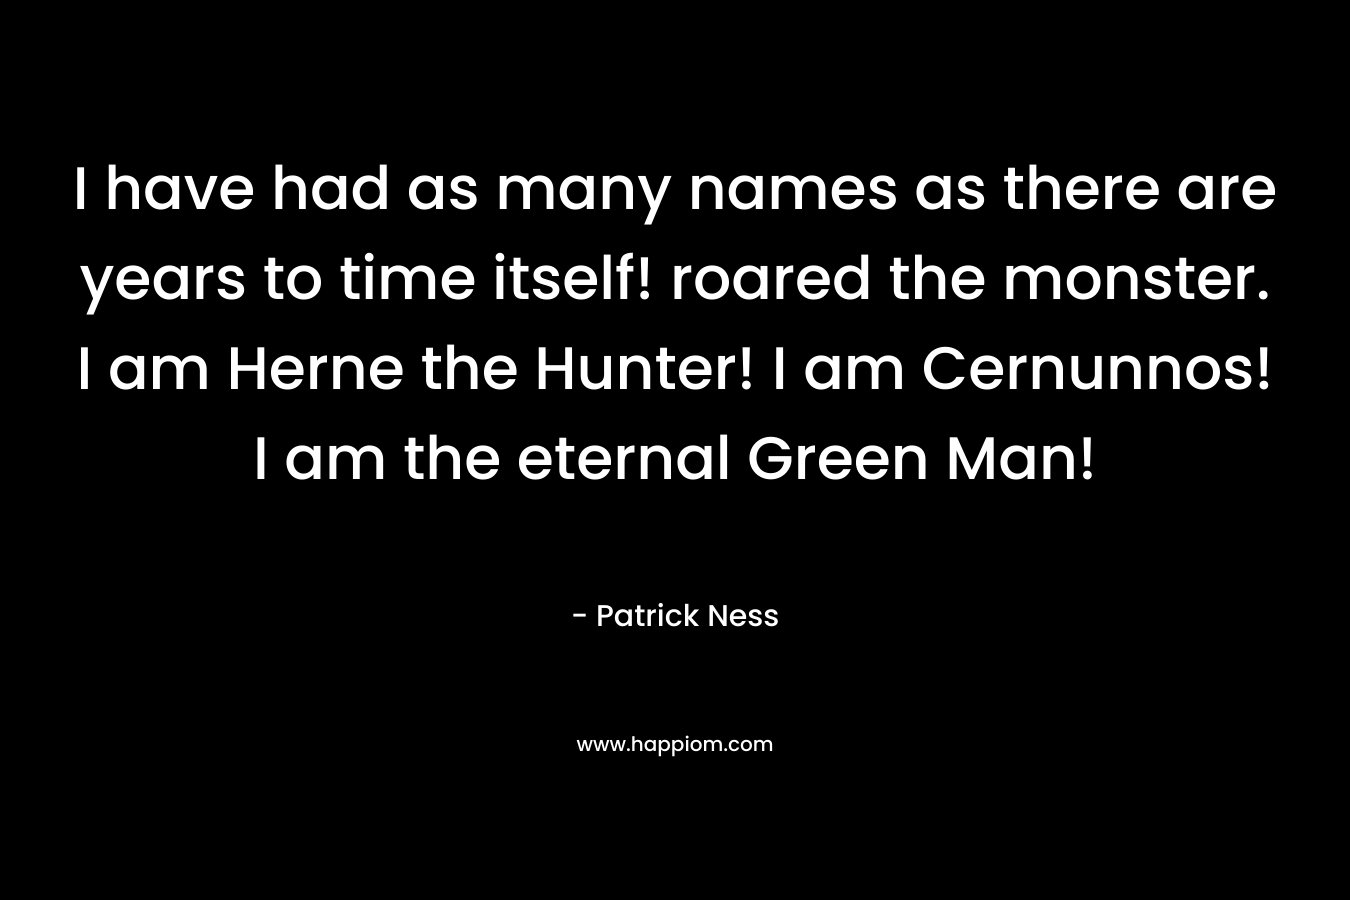 I have had as many names as there are years to time itself! roared the monster. I am Herne the Hunter! I am Cernunnos! I am the eternal Green Man!